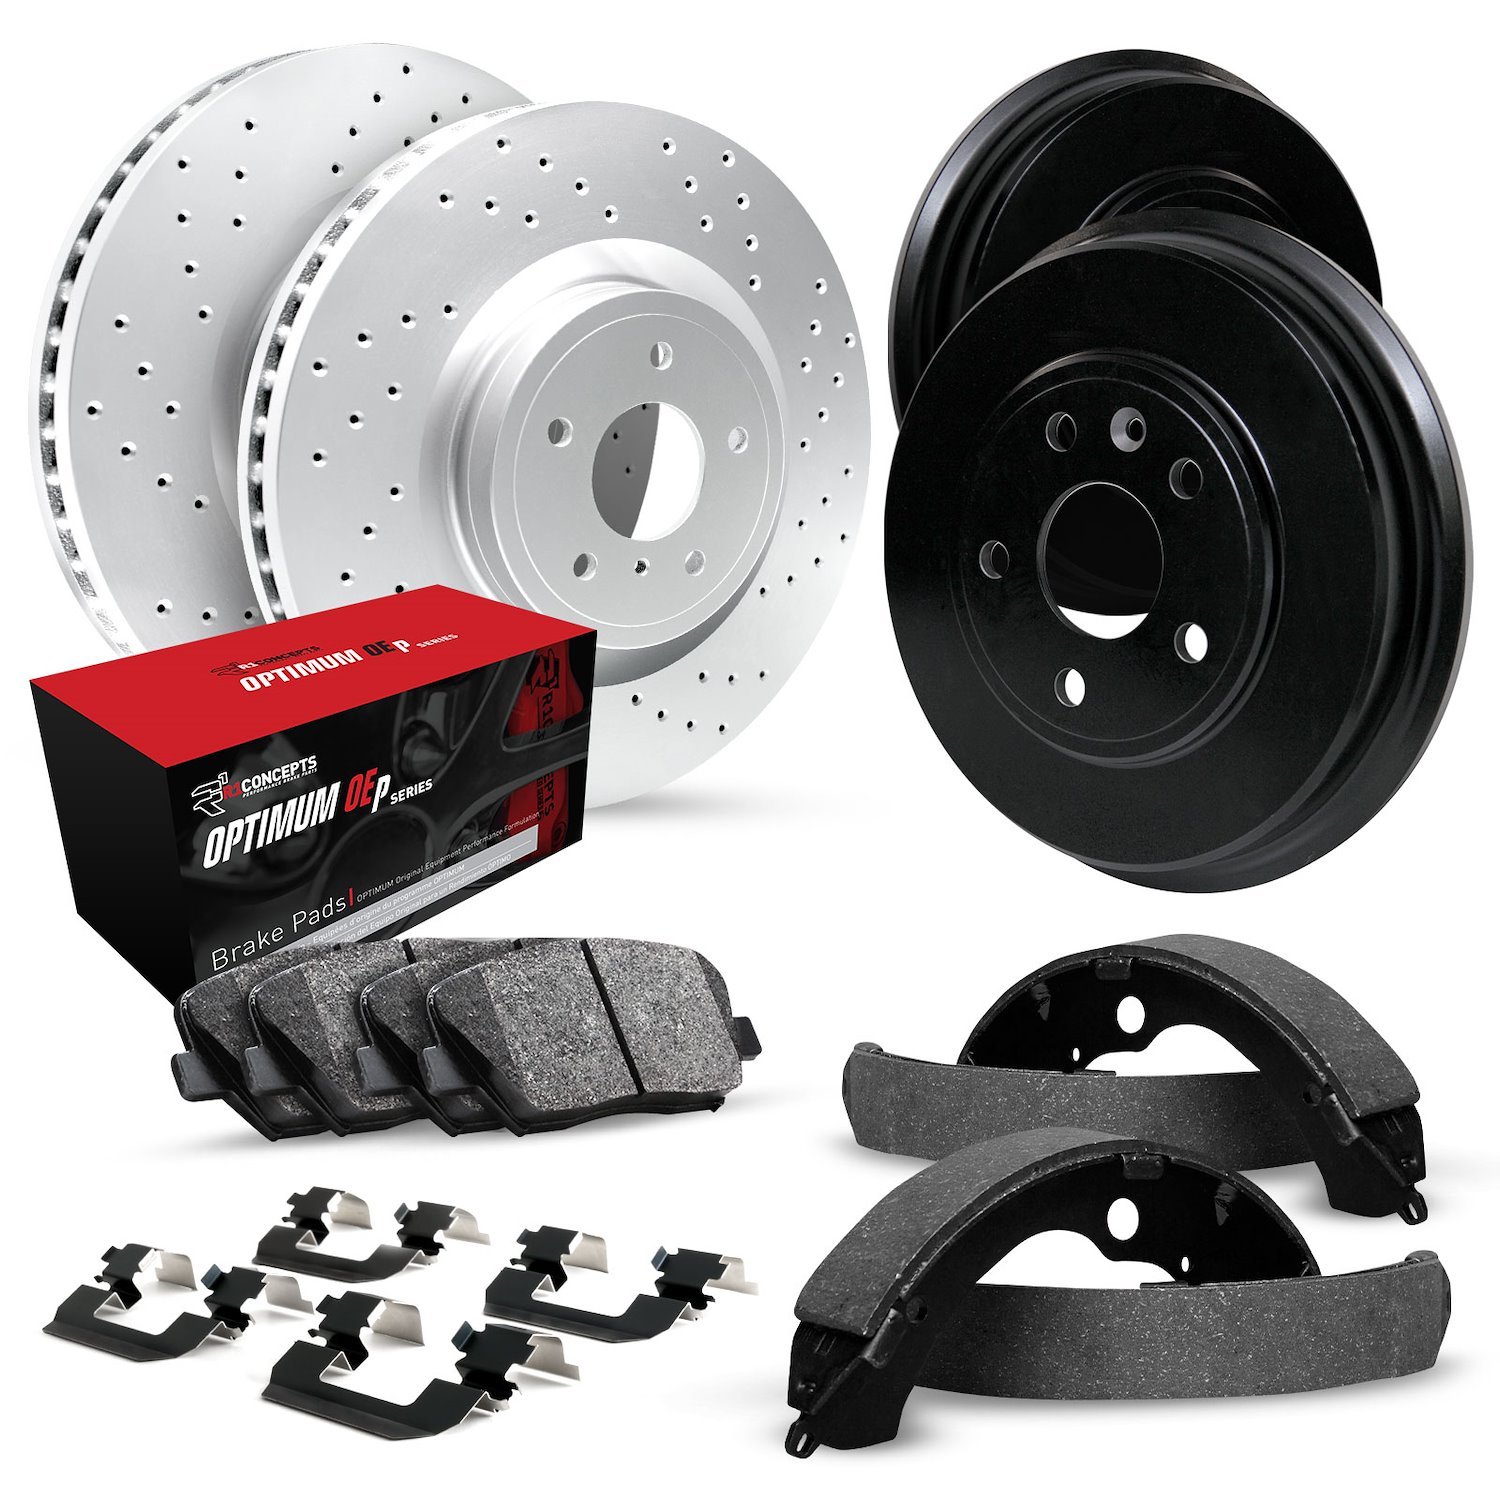 GEO-Carbon Drilled Brake Rotor & Drum Set w/Optimum OE Pads, Shoes, & Hardware, 1972-1973 GM, Position: Front & Rear